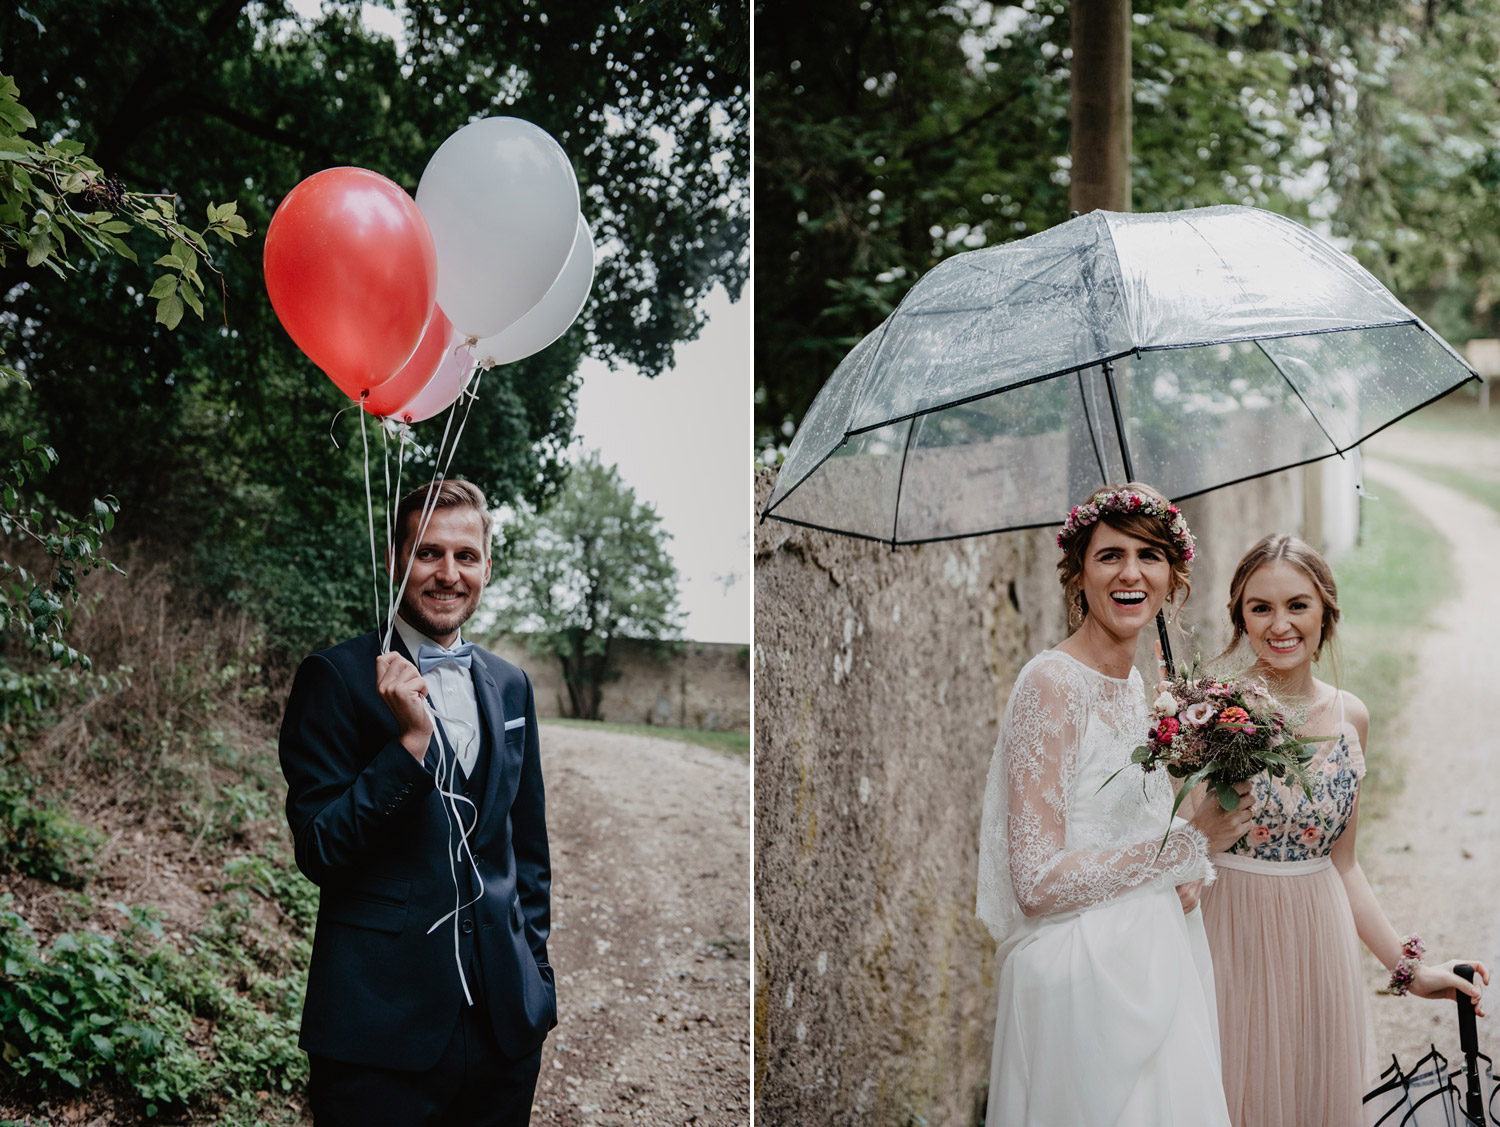 groom with balloons and boho bride with flowercrown and umbrella laughing in the rain at forest wedding